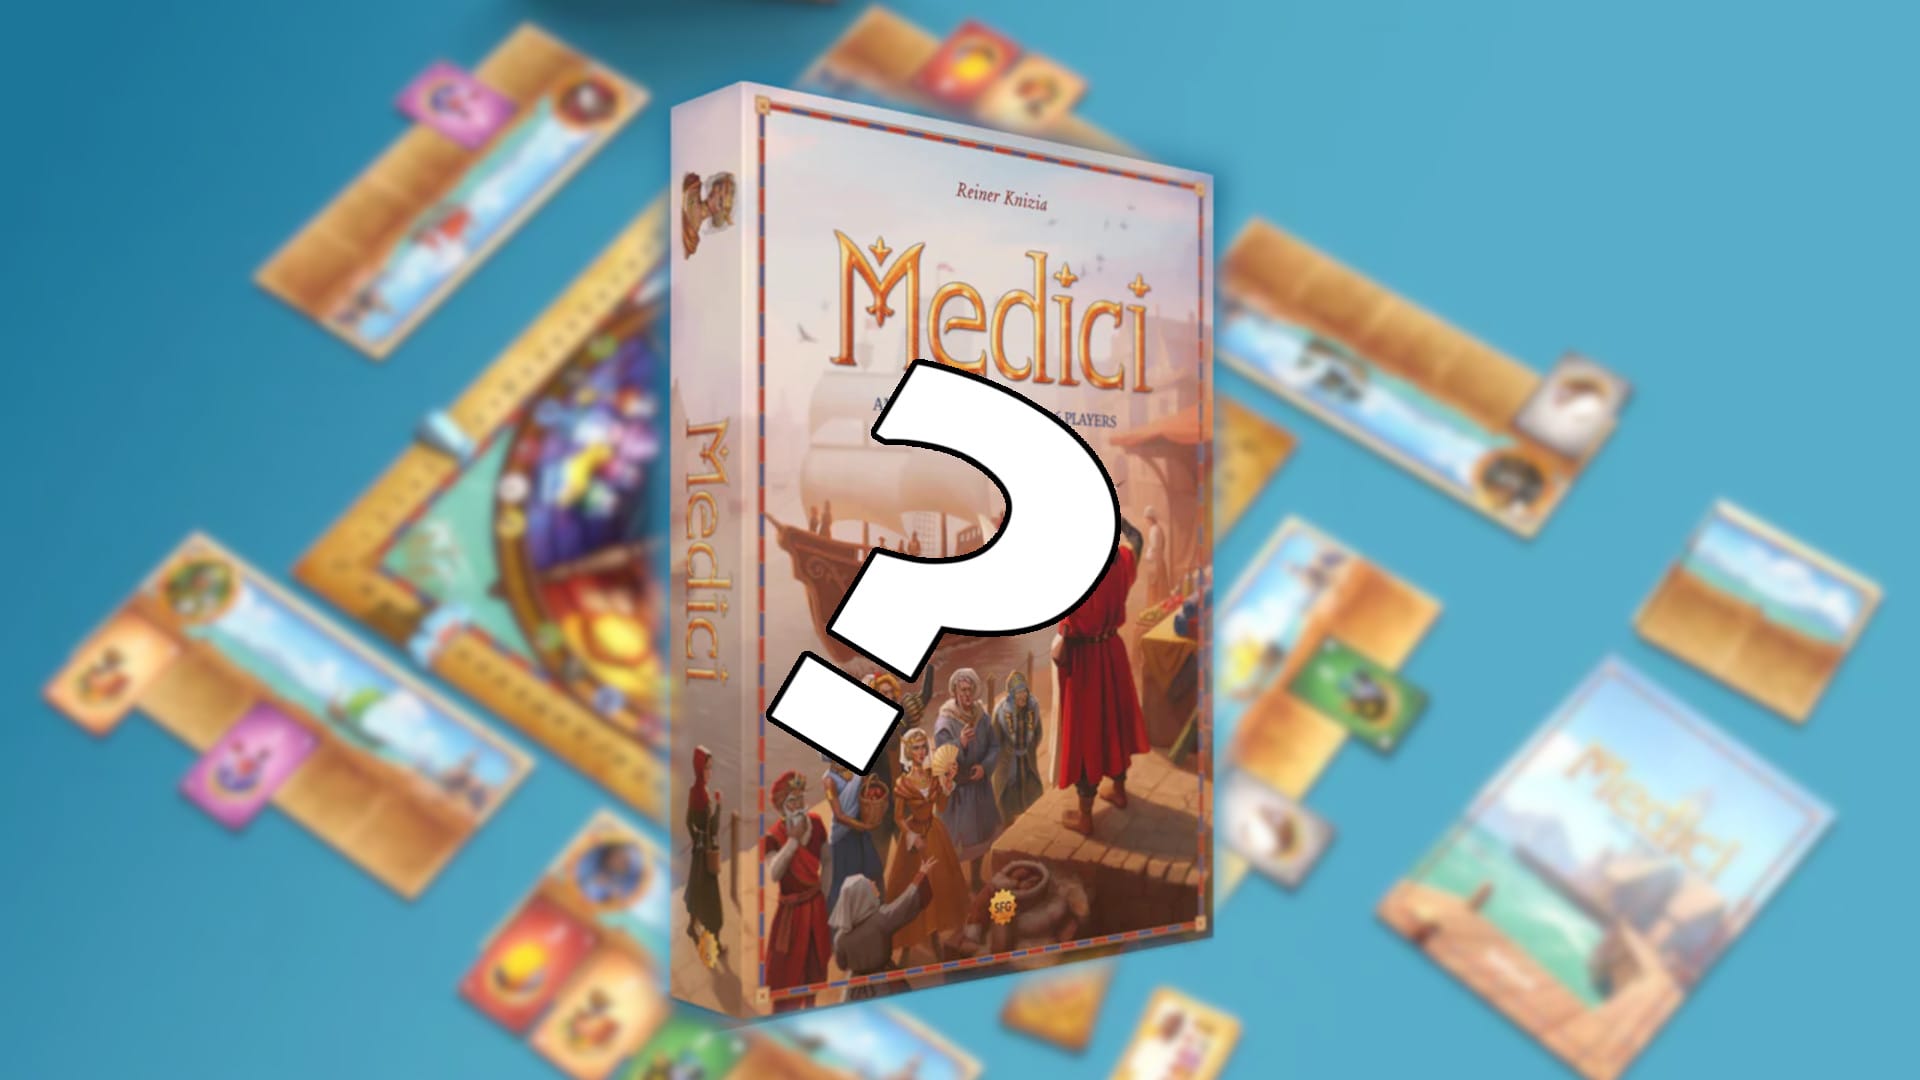 Medici game and board components with a question mark in front